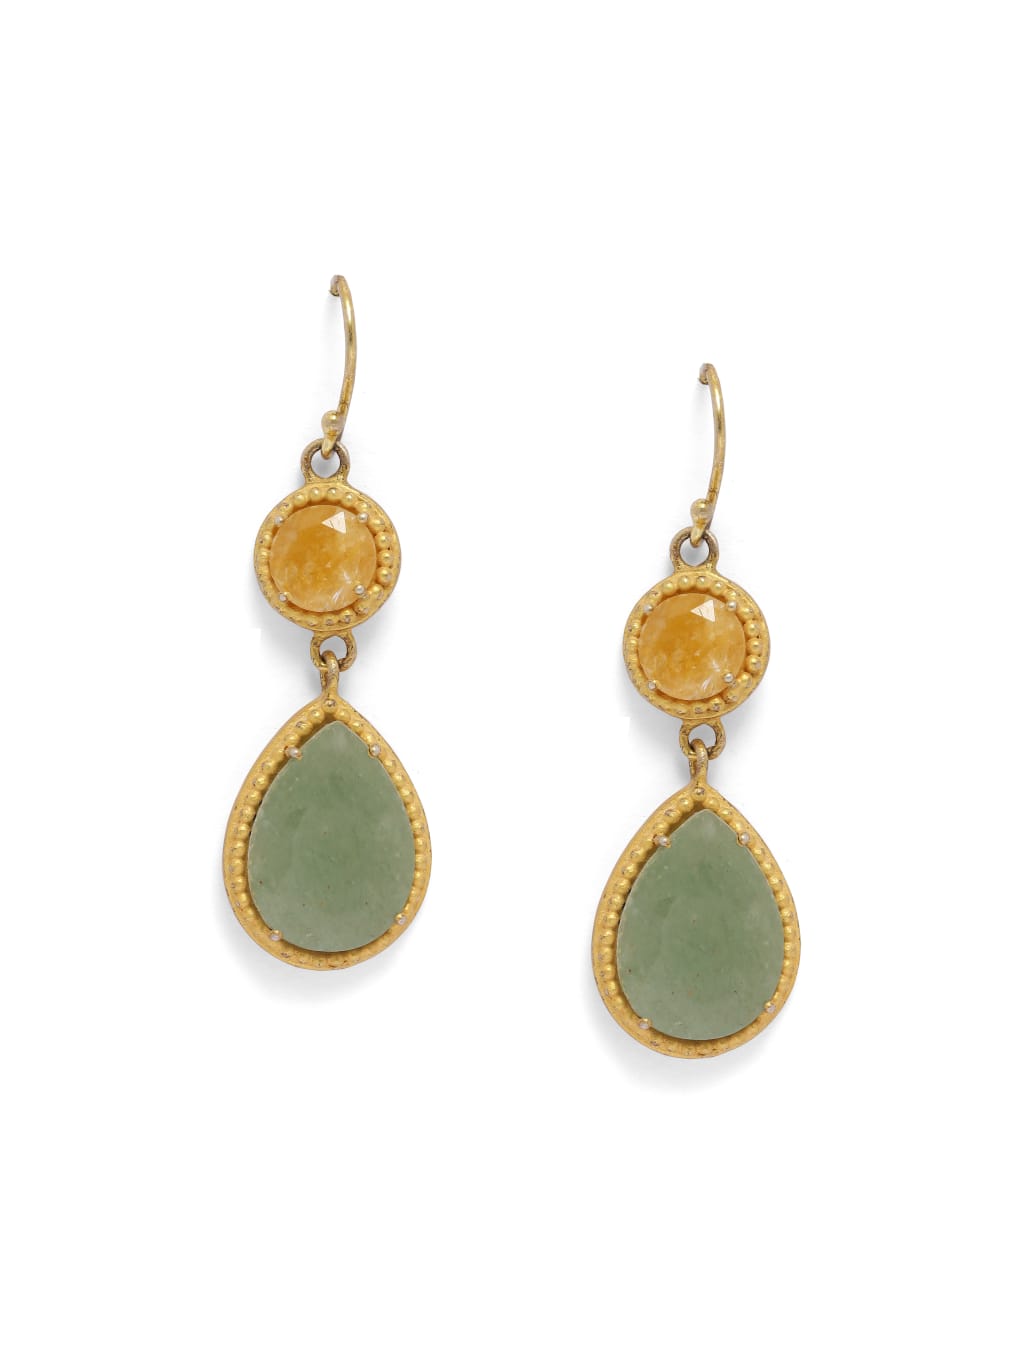 92.5 sterling Silver Gold plated with faceted yellow aventurine and grapes aventurine hook earrings.